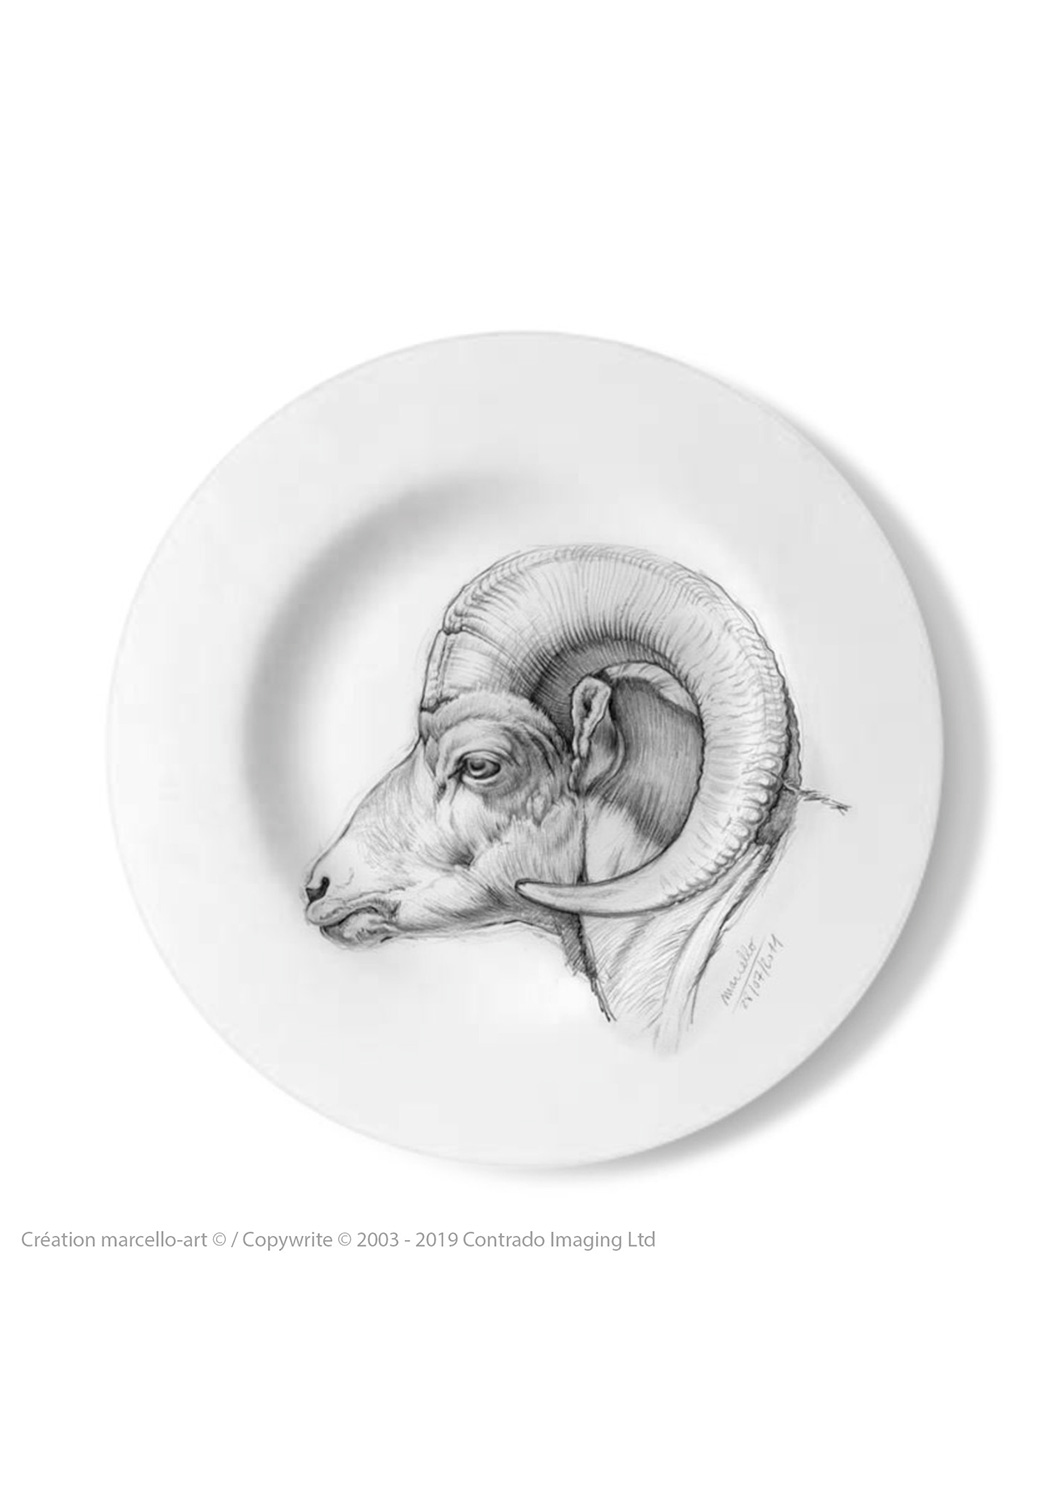 Marcello-art: Decorating Plates Decorating plate 51 bighorn sheep